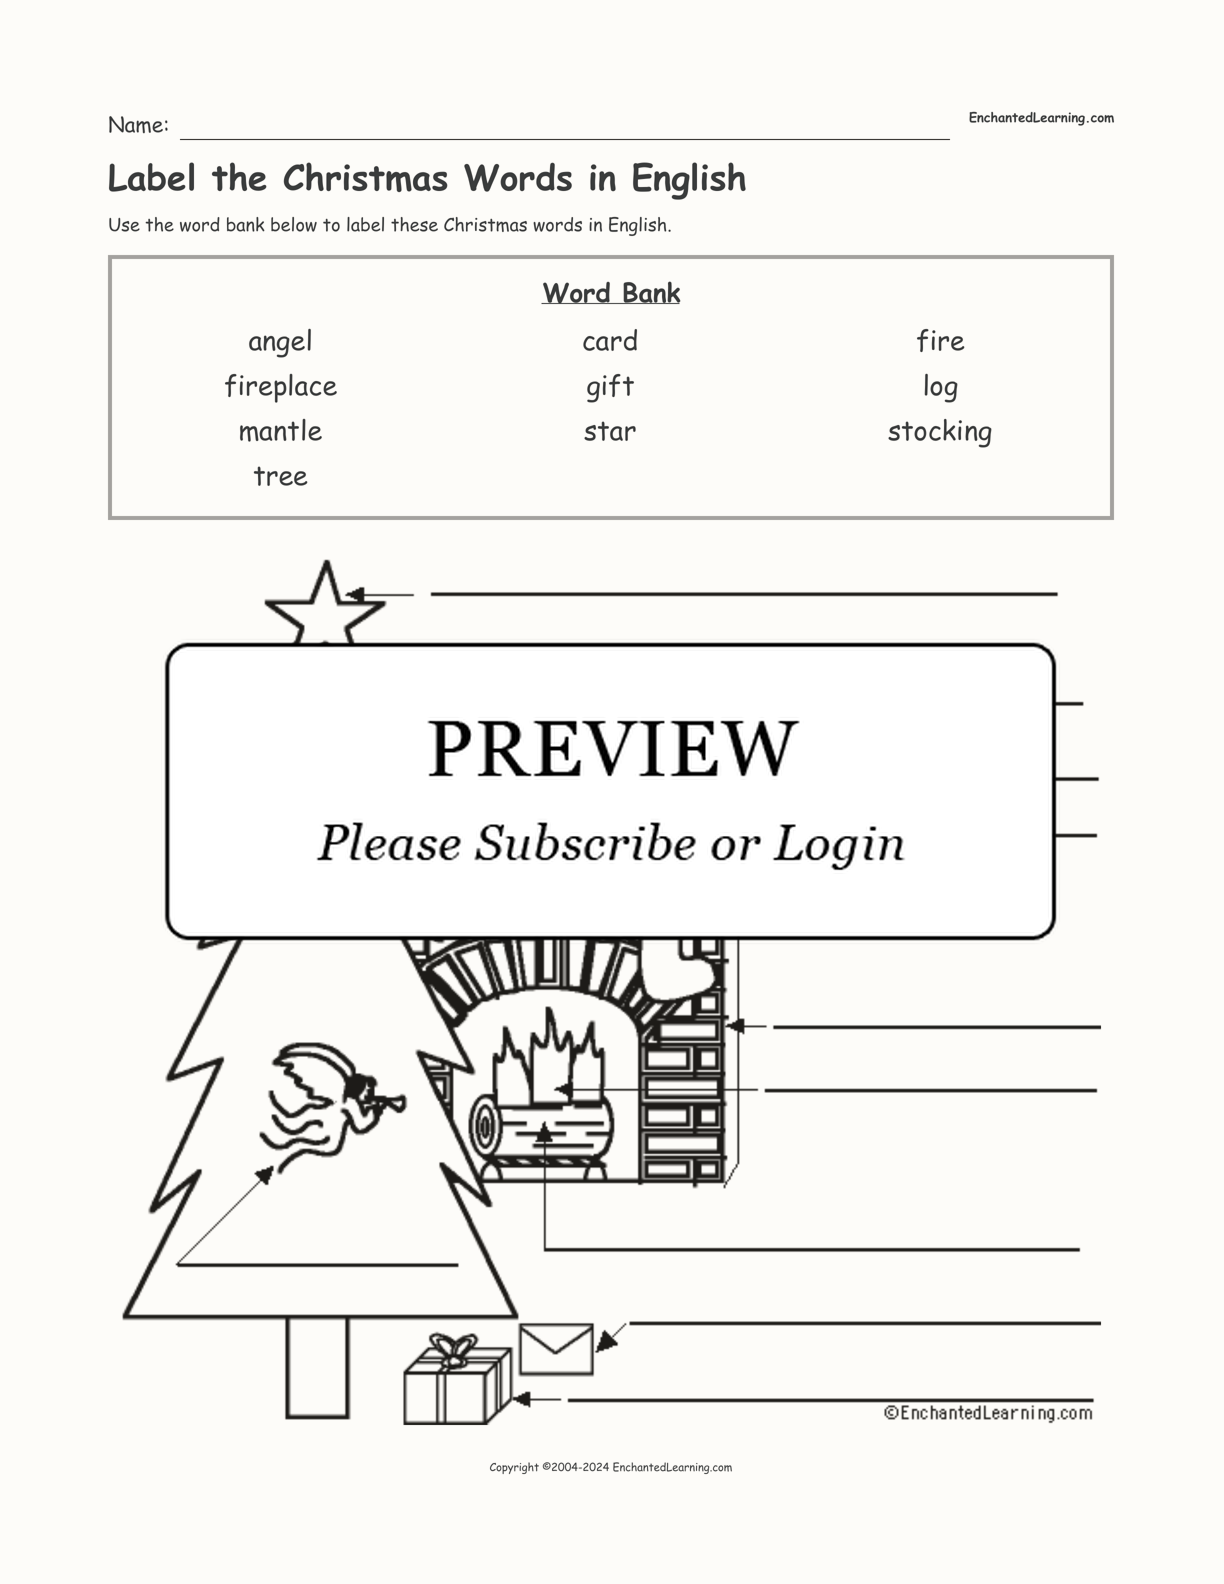 Label the Christmas Words in English interactive worksheet page 1